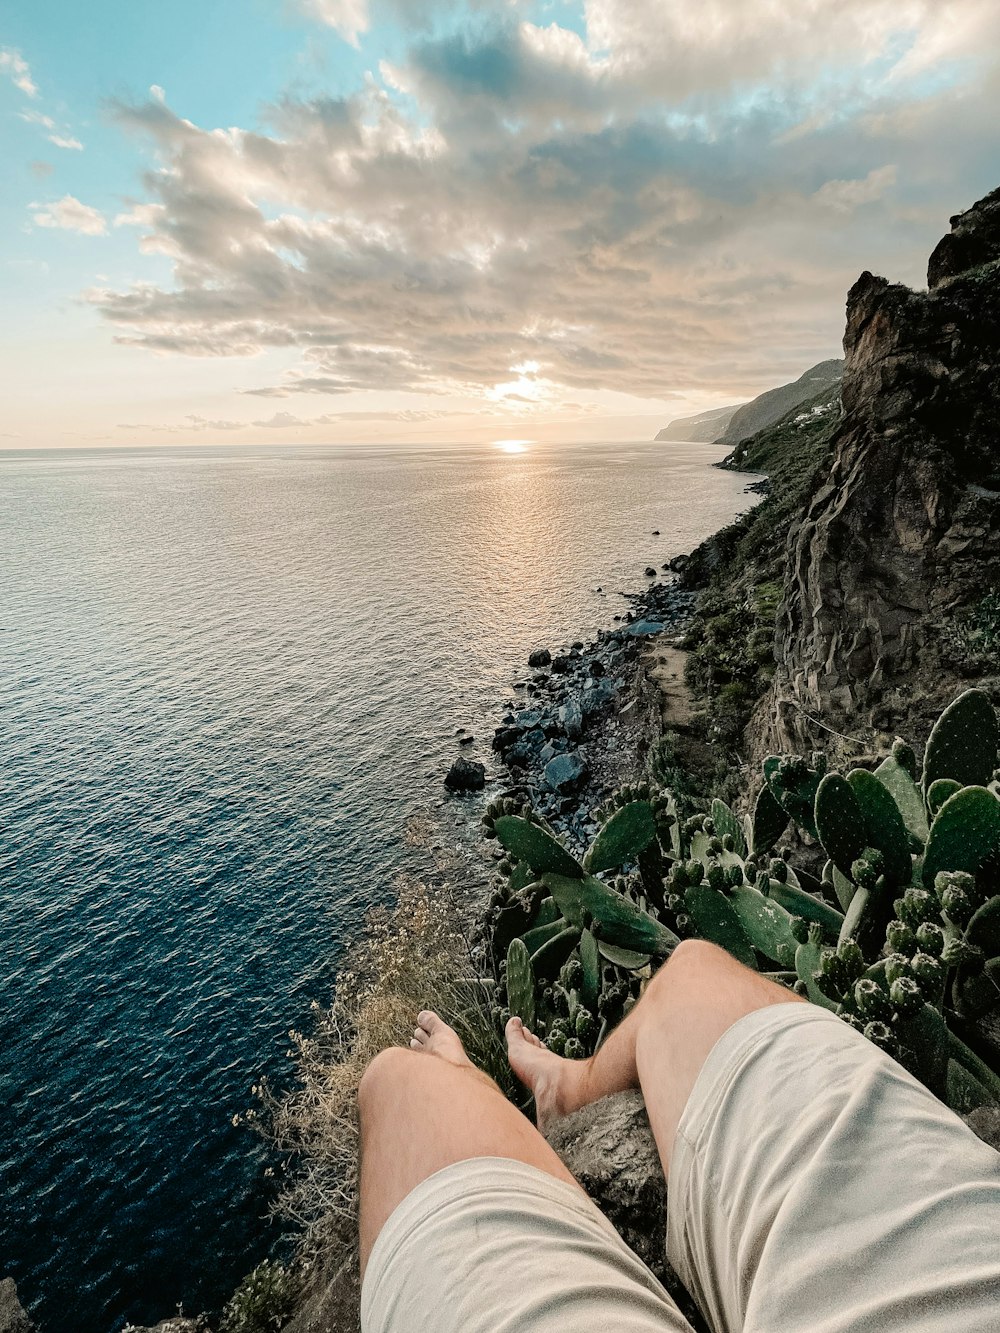 a person laying on a cliff overlooking the ocean